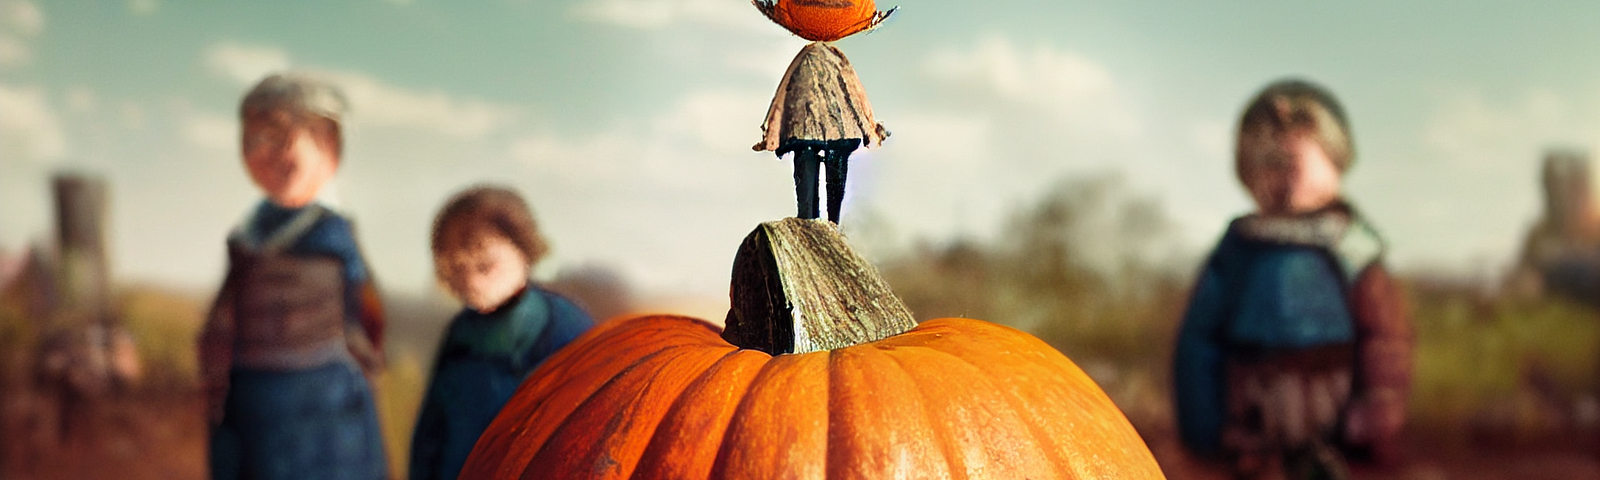 A carved pumpkin, creepy figures behind, and a tiny pumpkin-headed creature standing on top.